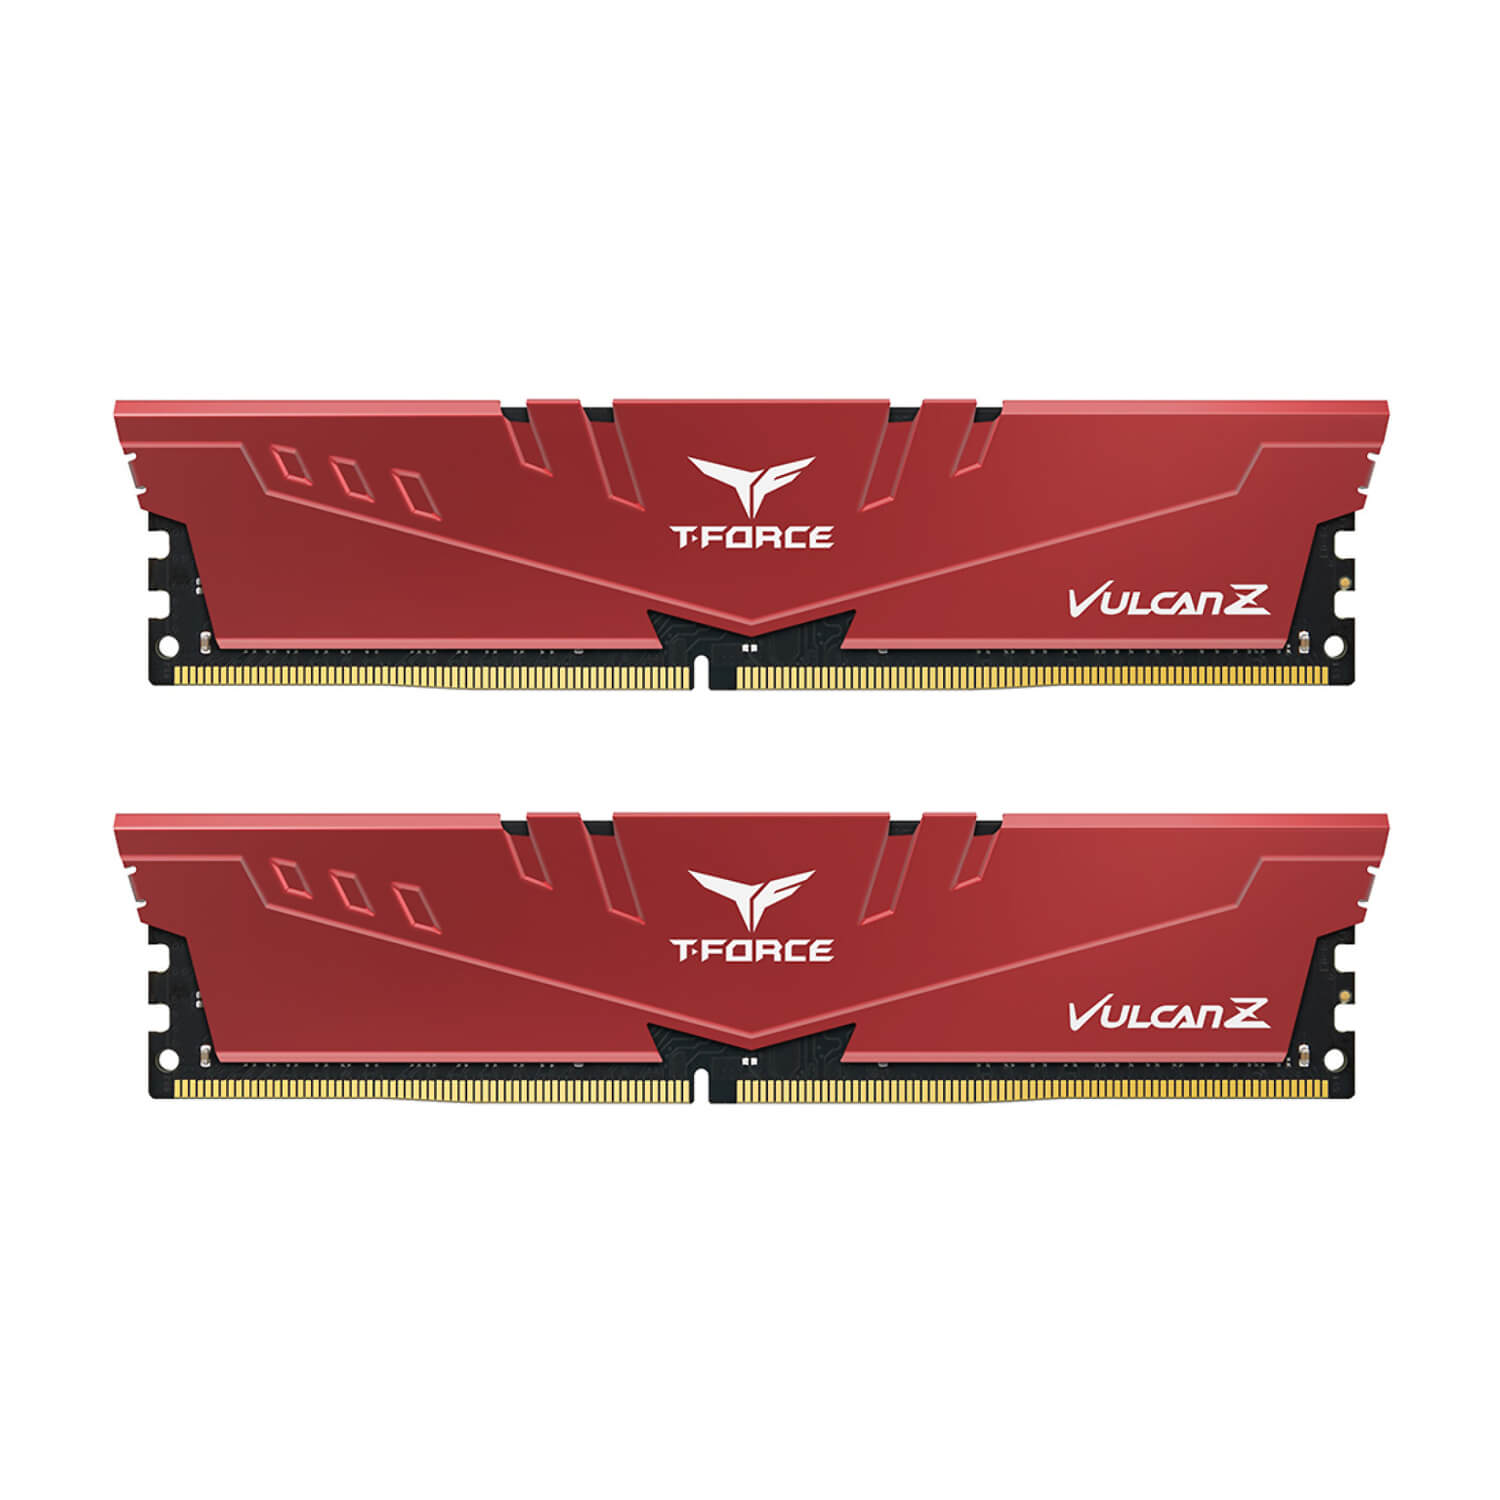 TEAMGROUP DDR4 64G (2X32G) 3200 CL16 VULCAN Z RED